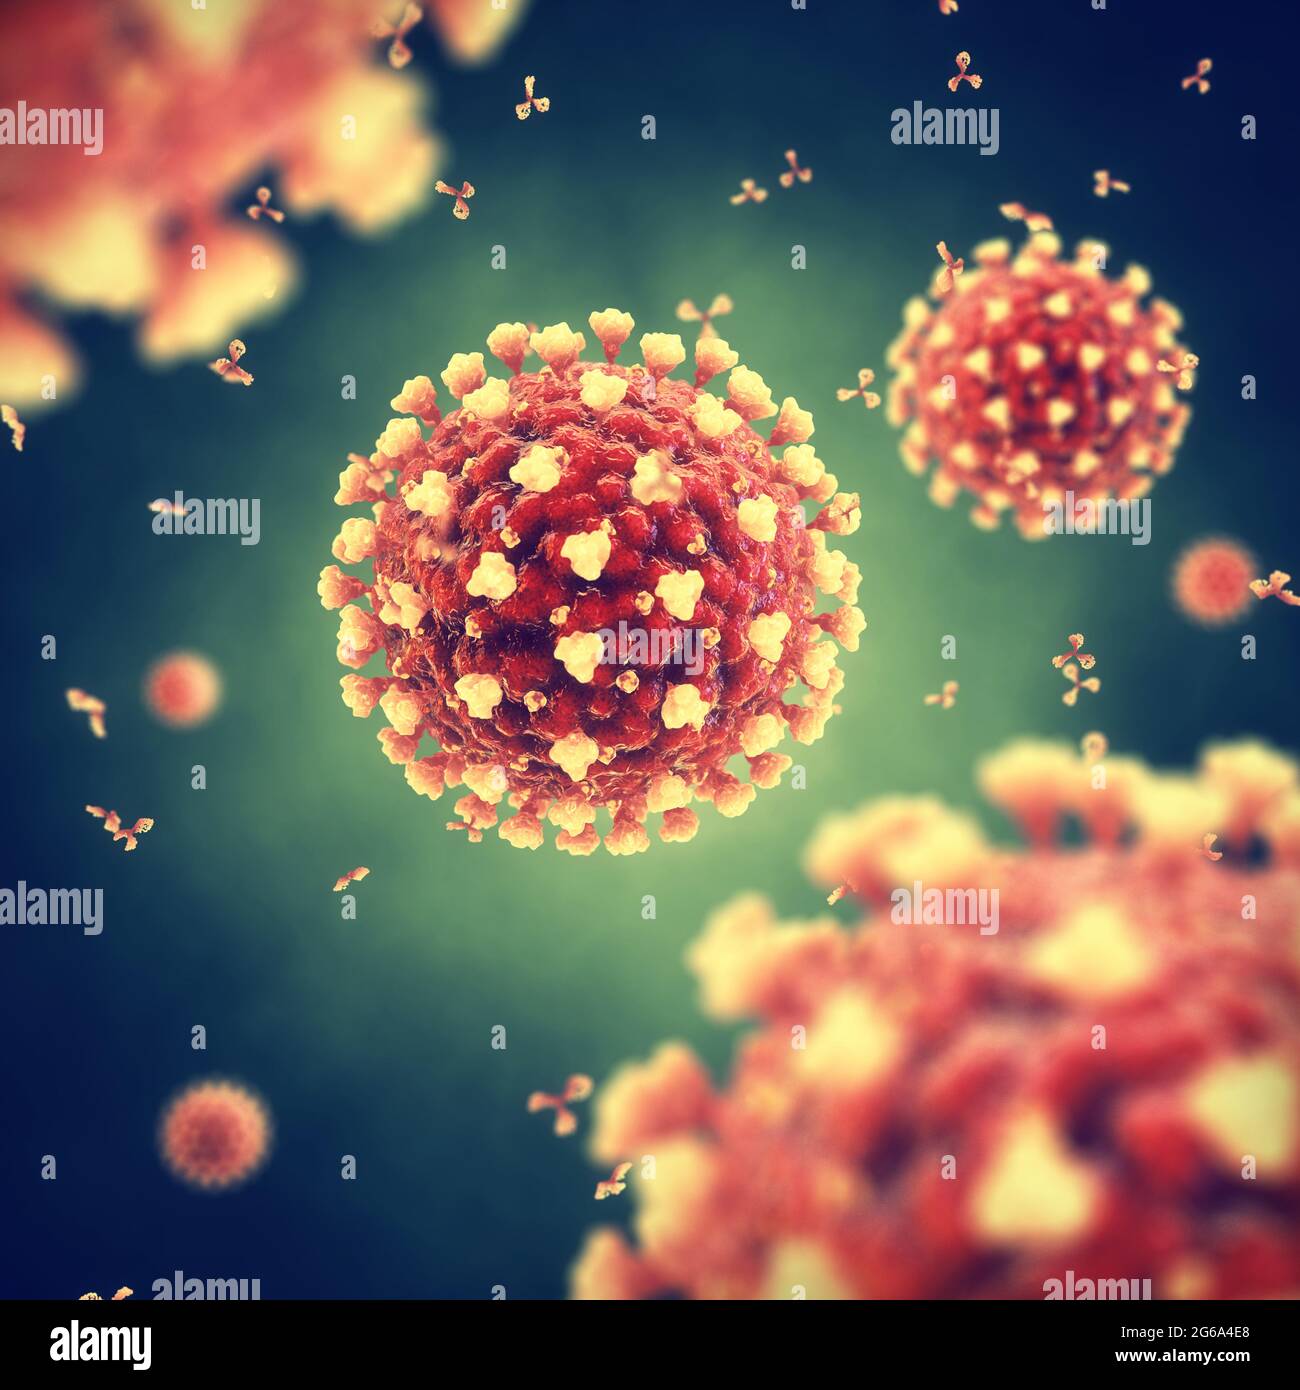 The Coronavirus is a highly contagious virus that causes severe acute respiratory syndrom. The COVID-19 global pandemic is caused by the SARS CoV-2. Stock Photo